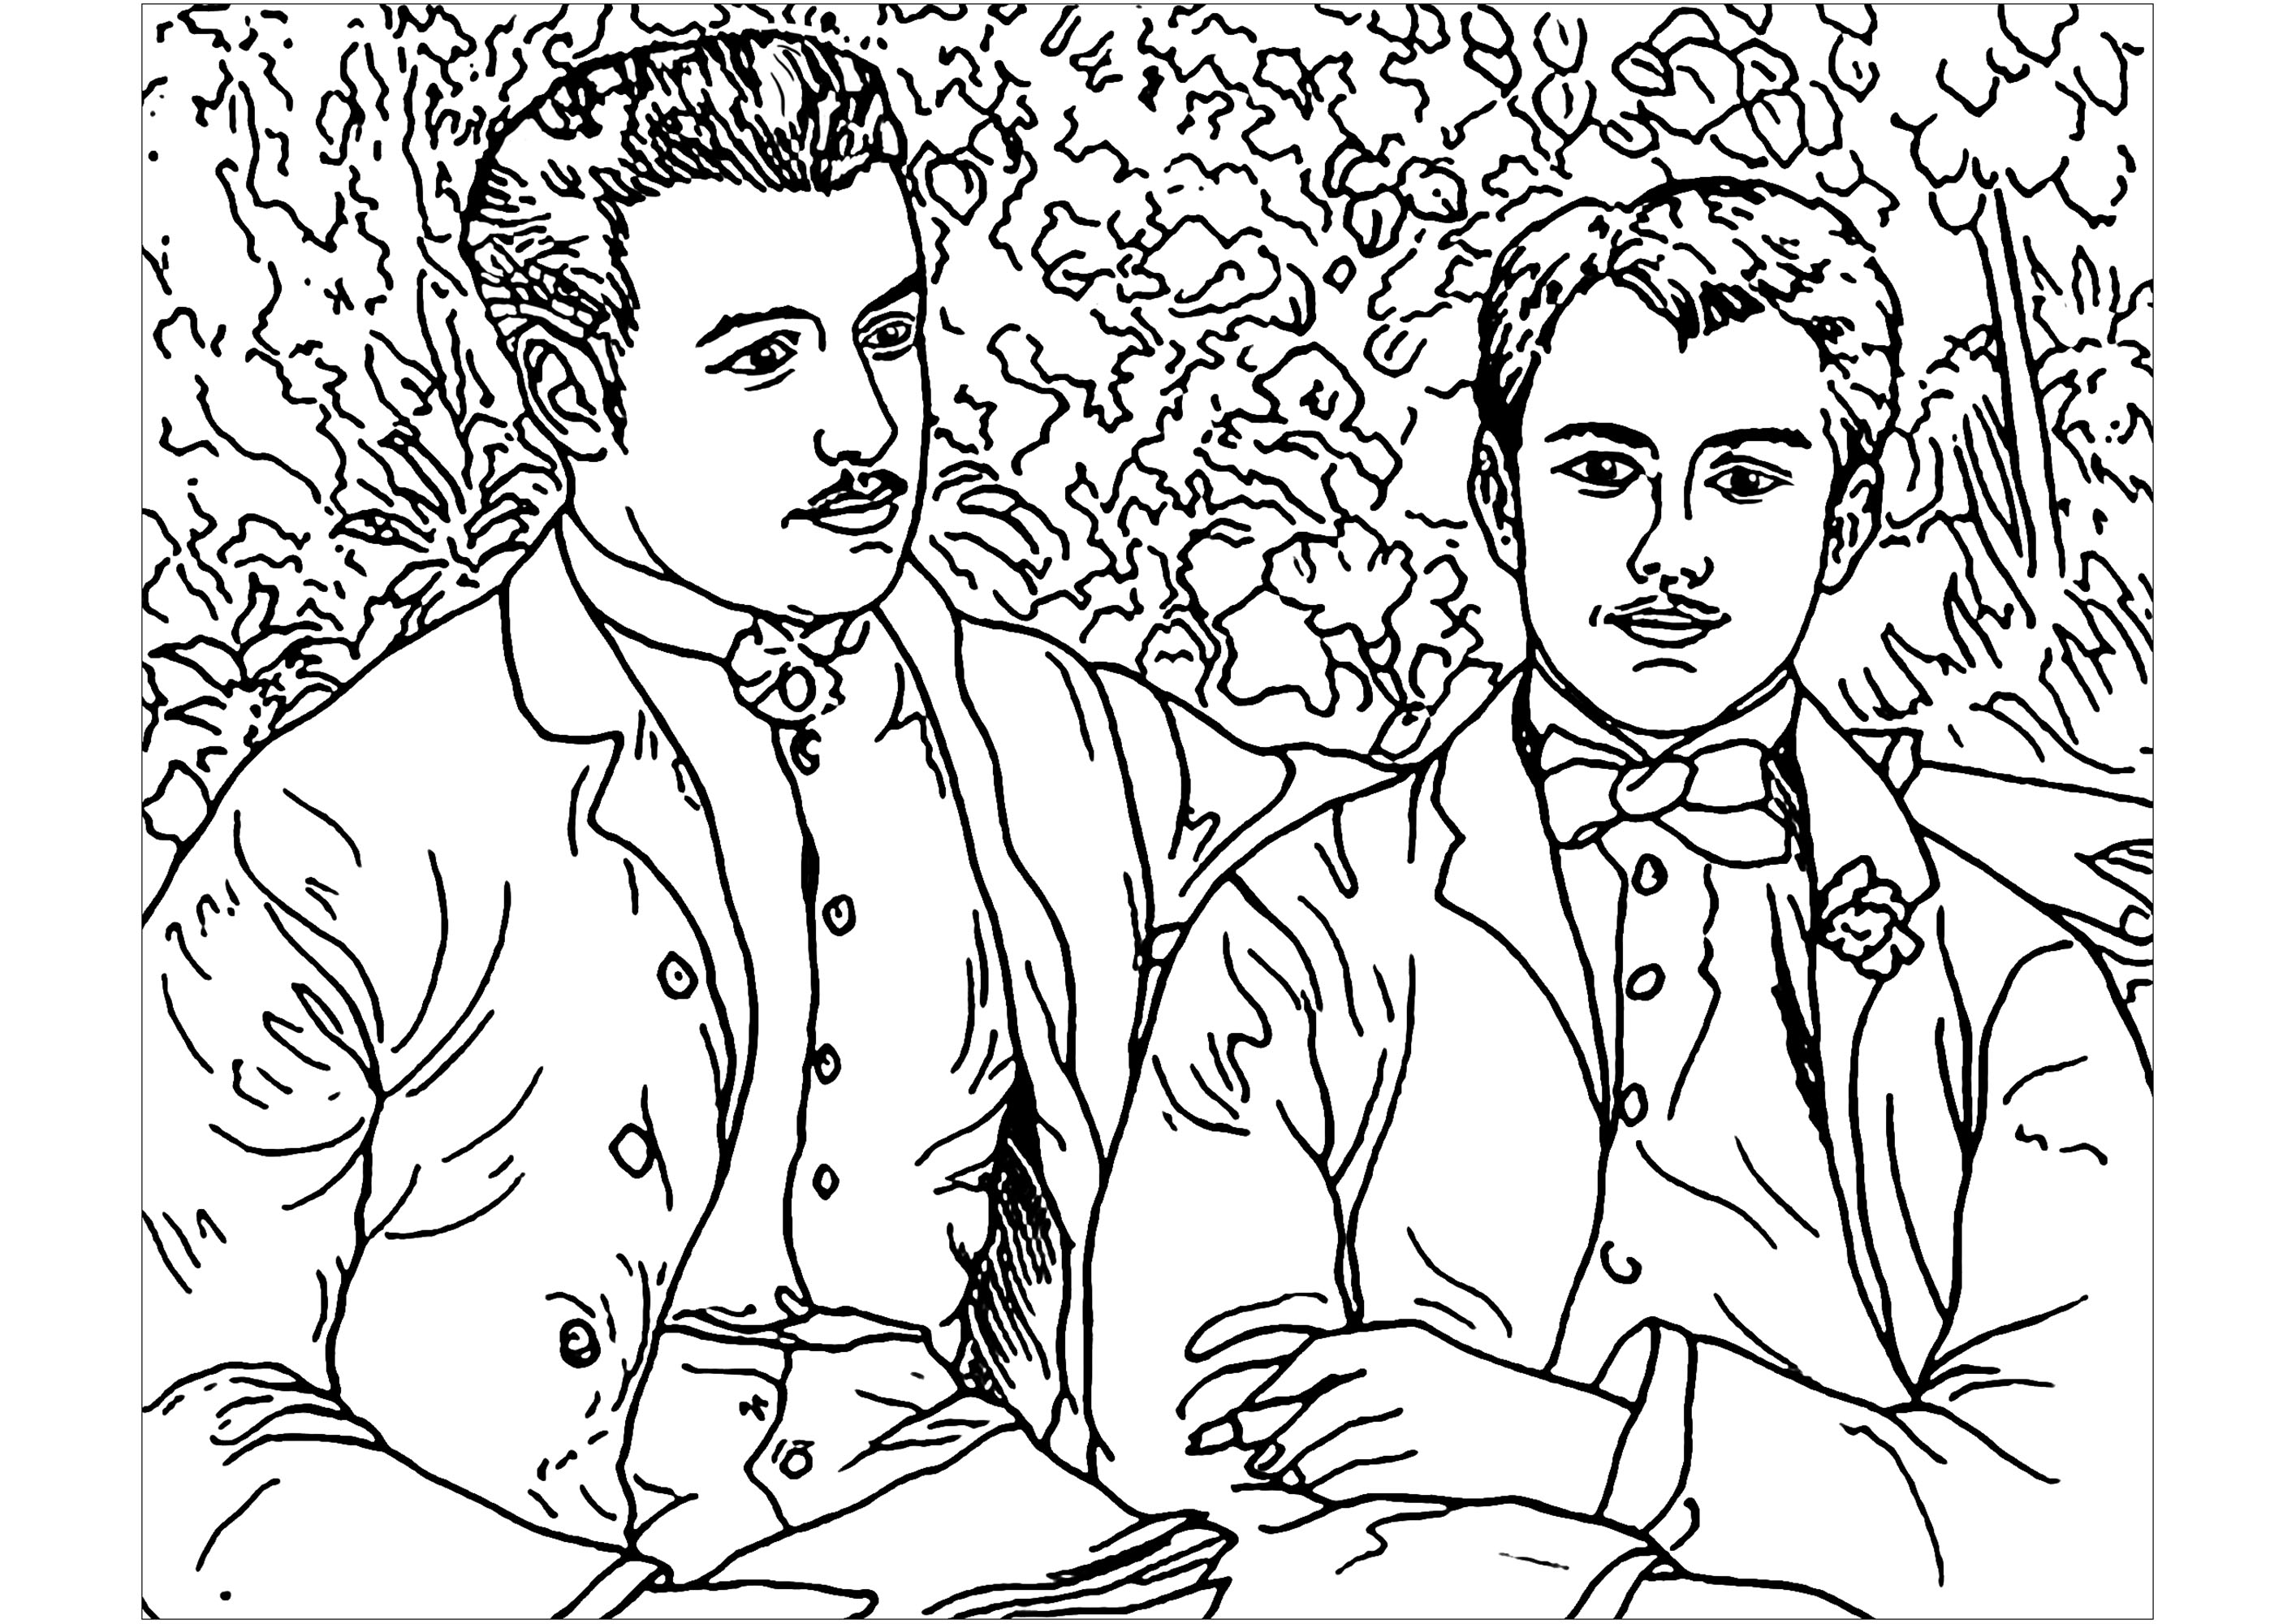 Coloring page inspired by a painting by Impressionist artist Pierre-Auguste Renoir : Portrait of Charles and Georges Durand Ruel